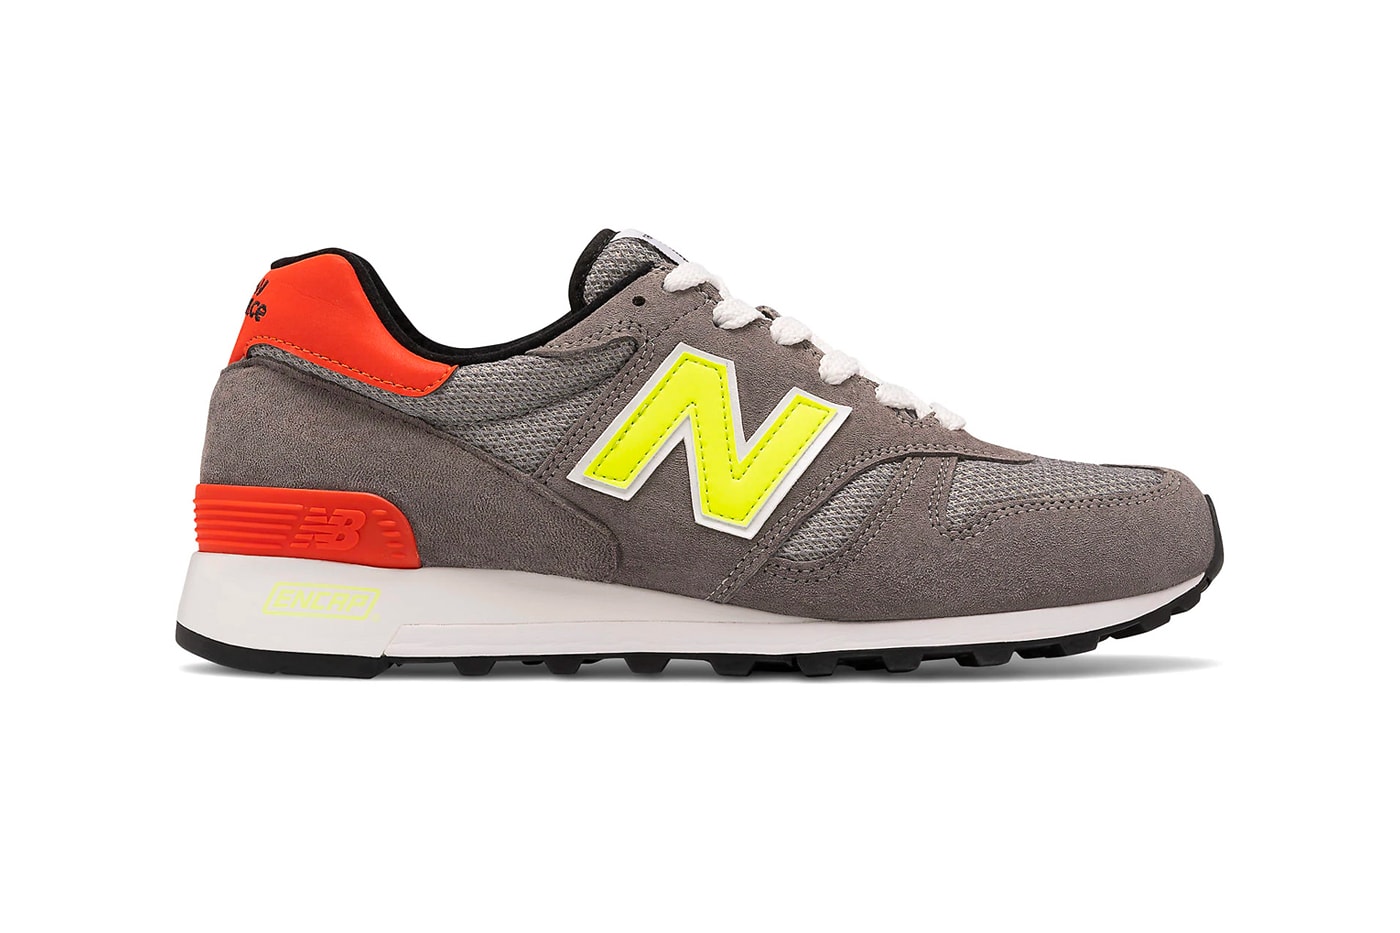 New Balance Made in US ML1300V1 Gray Yellow menswear streetwear kicks shoes runners trainers footwear sneakers fall winter 2020 collection fw20